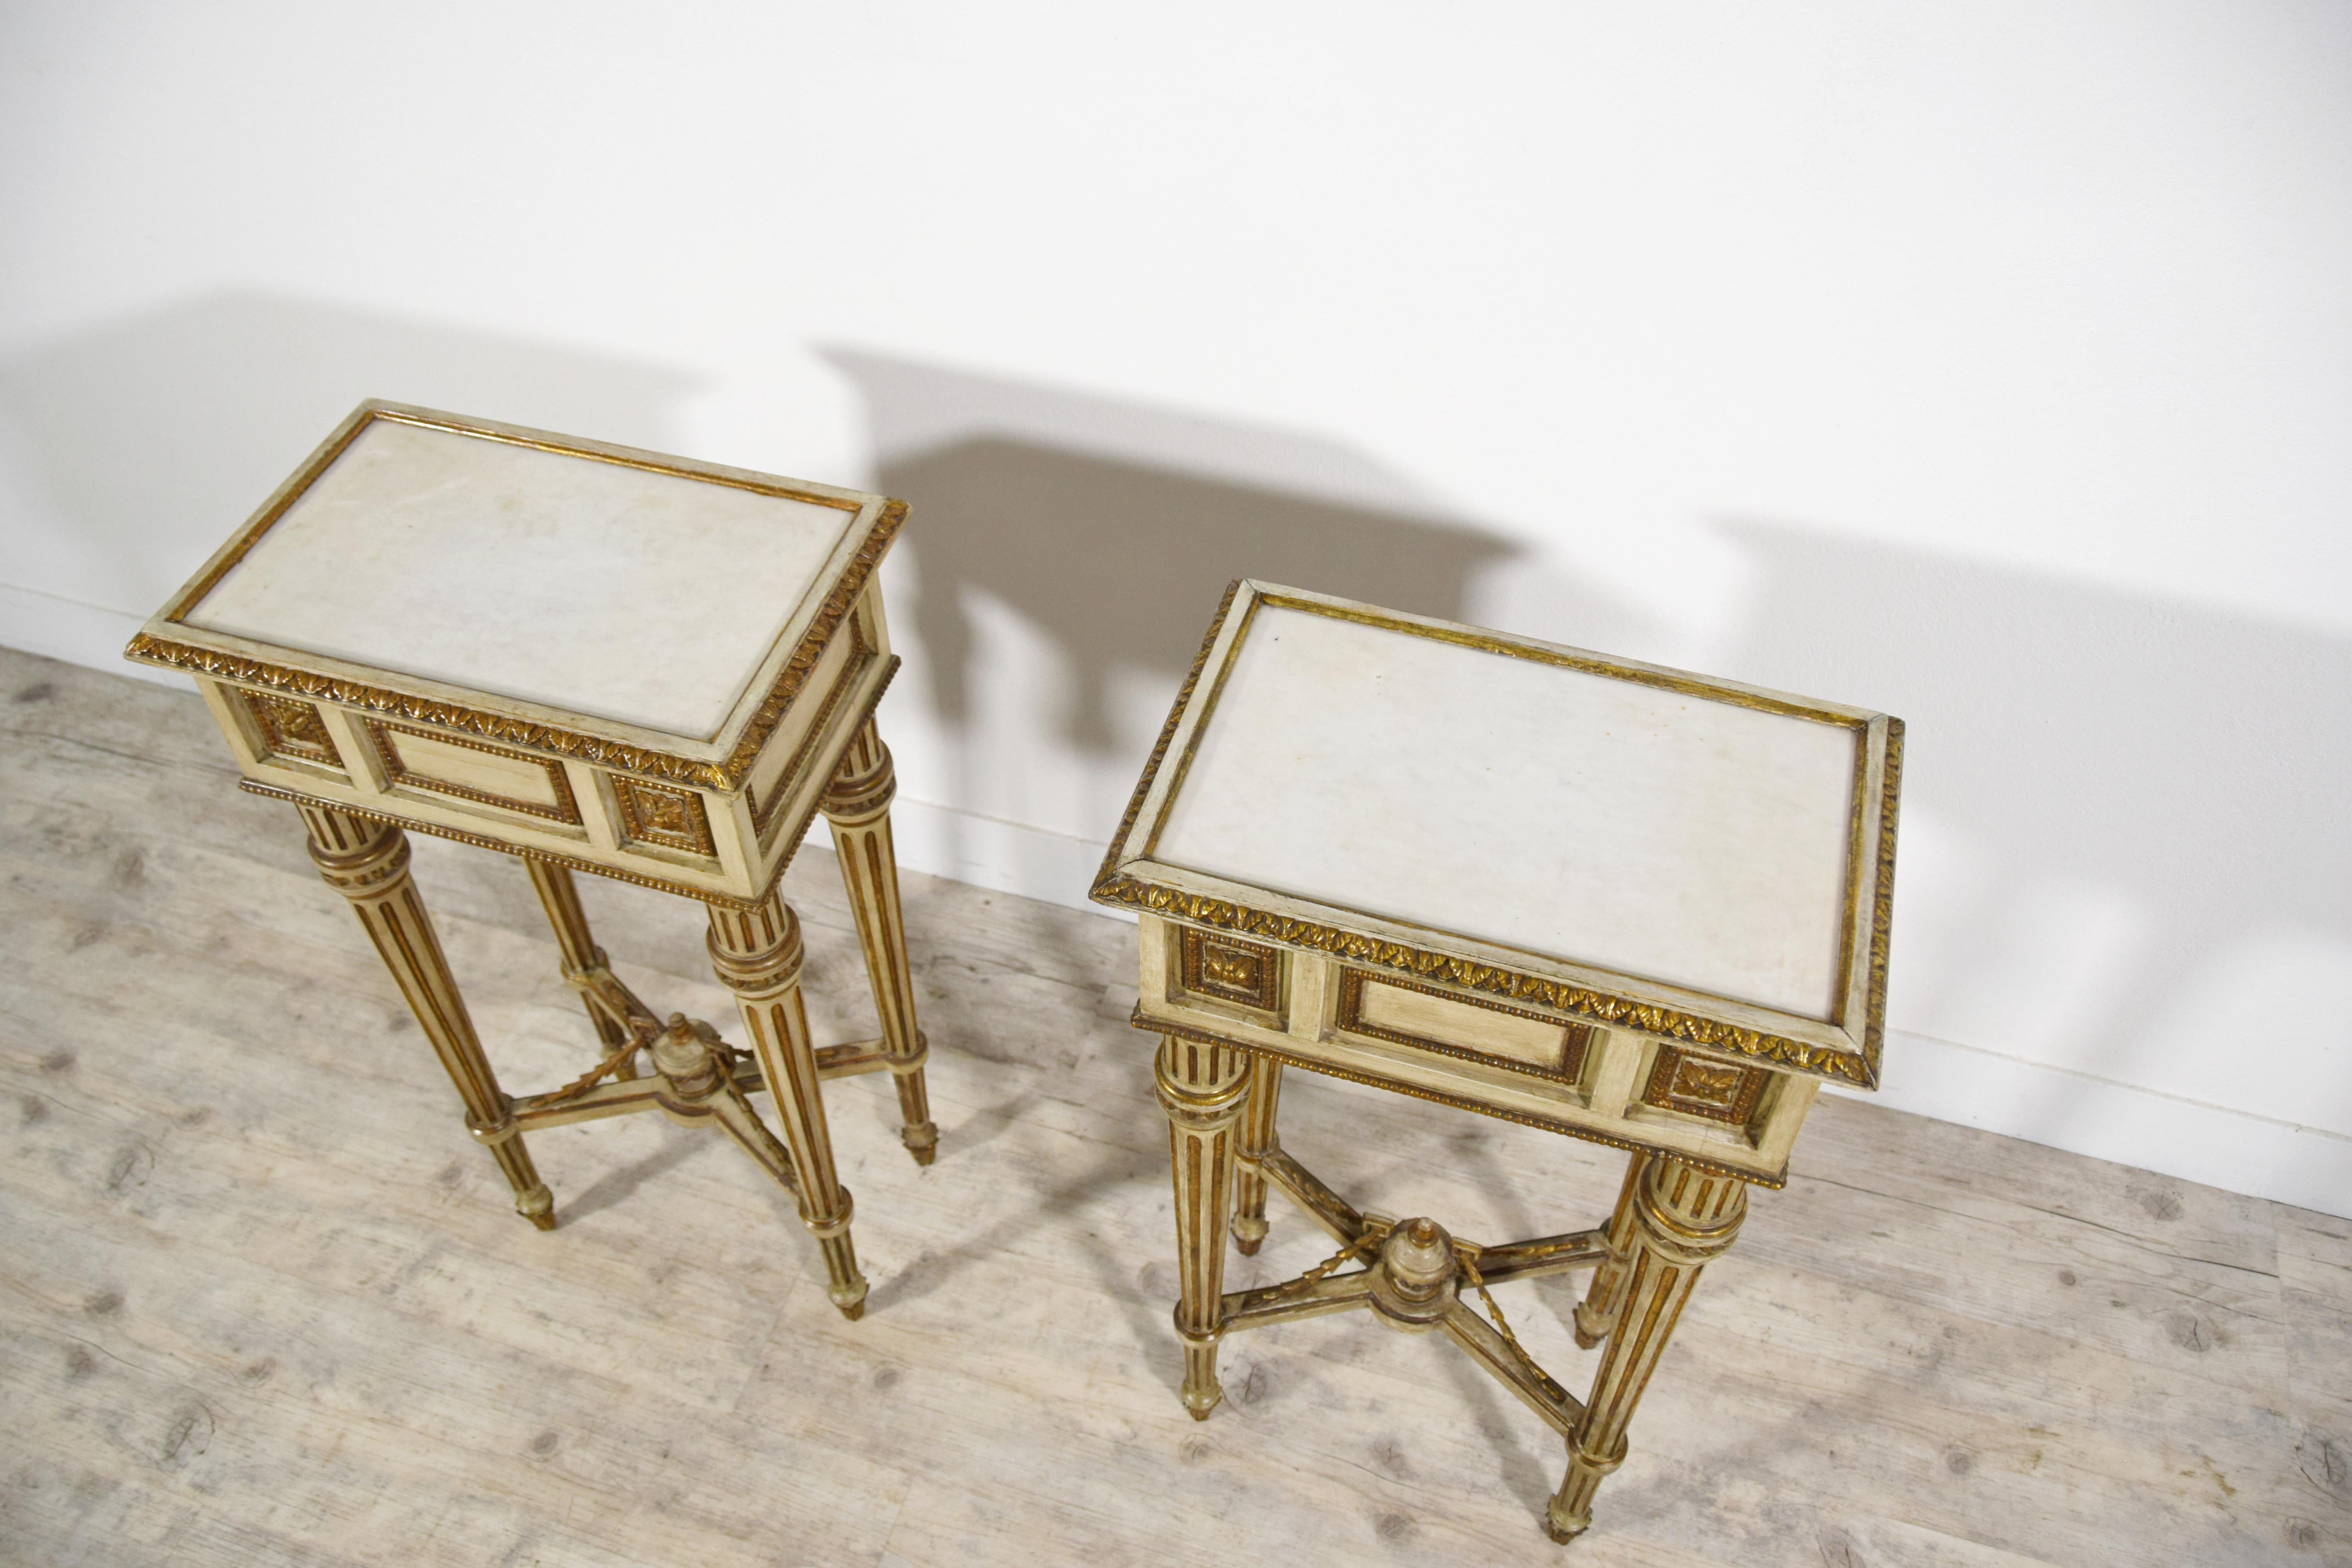 19th Century, Pair of Italian Louis XVI Style Lacquered Wood Central Tables  17